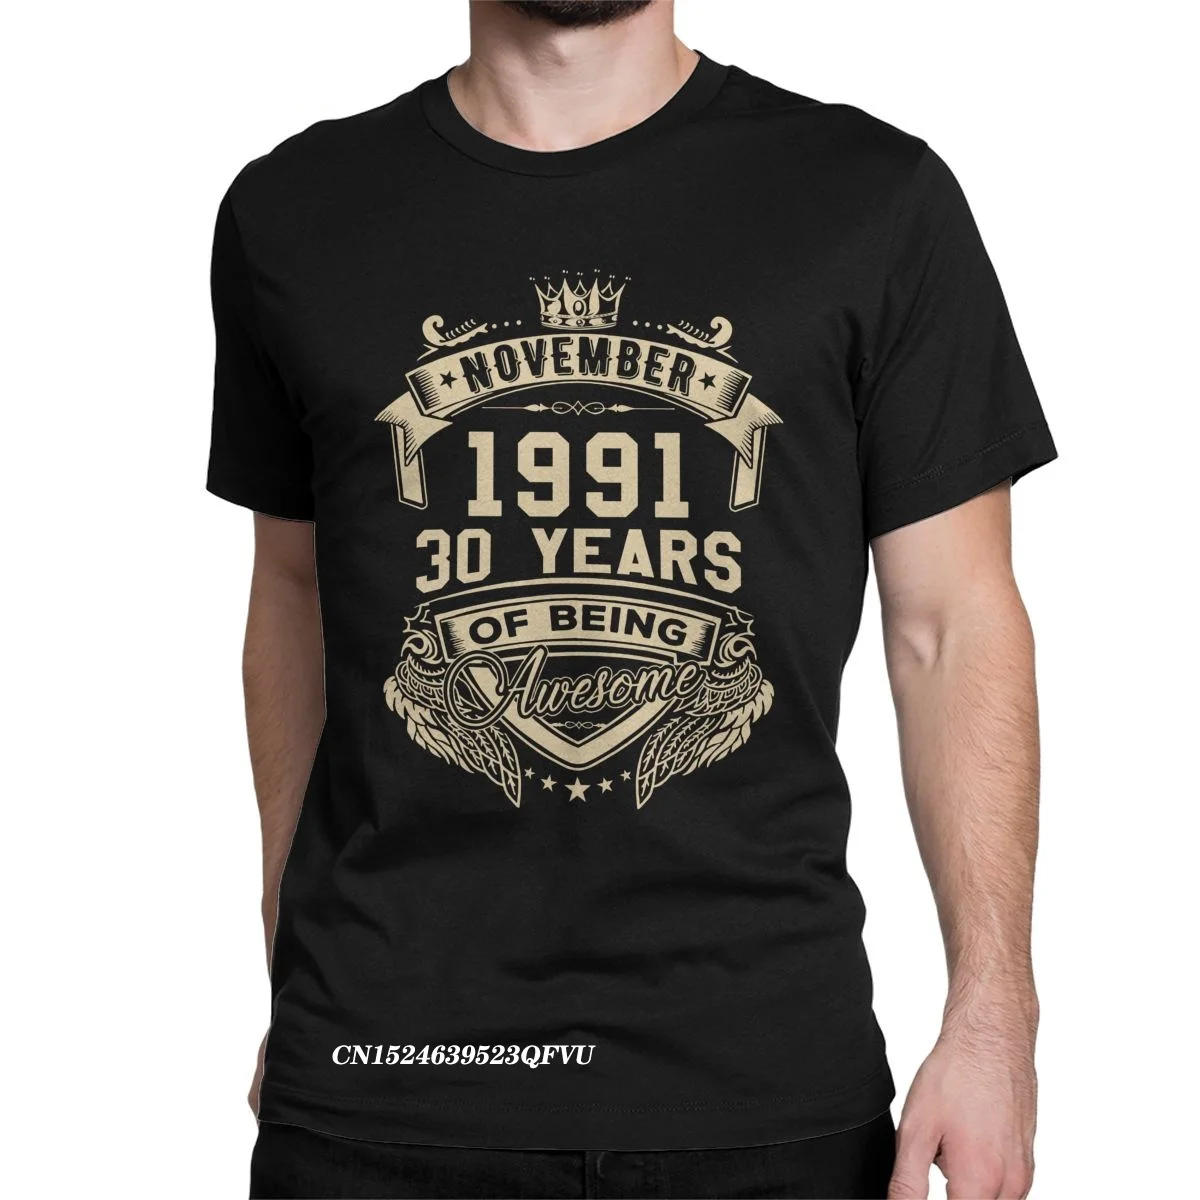 

Men Women's T-Shirts Born In November 1991 30 Years Of Being Awesome Limited Tees 30th Birthday Gift Tshirt Plus Size Tops